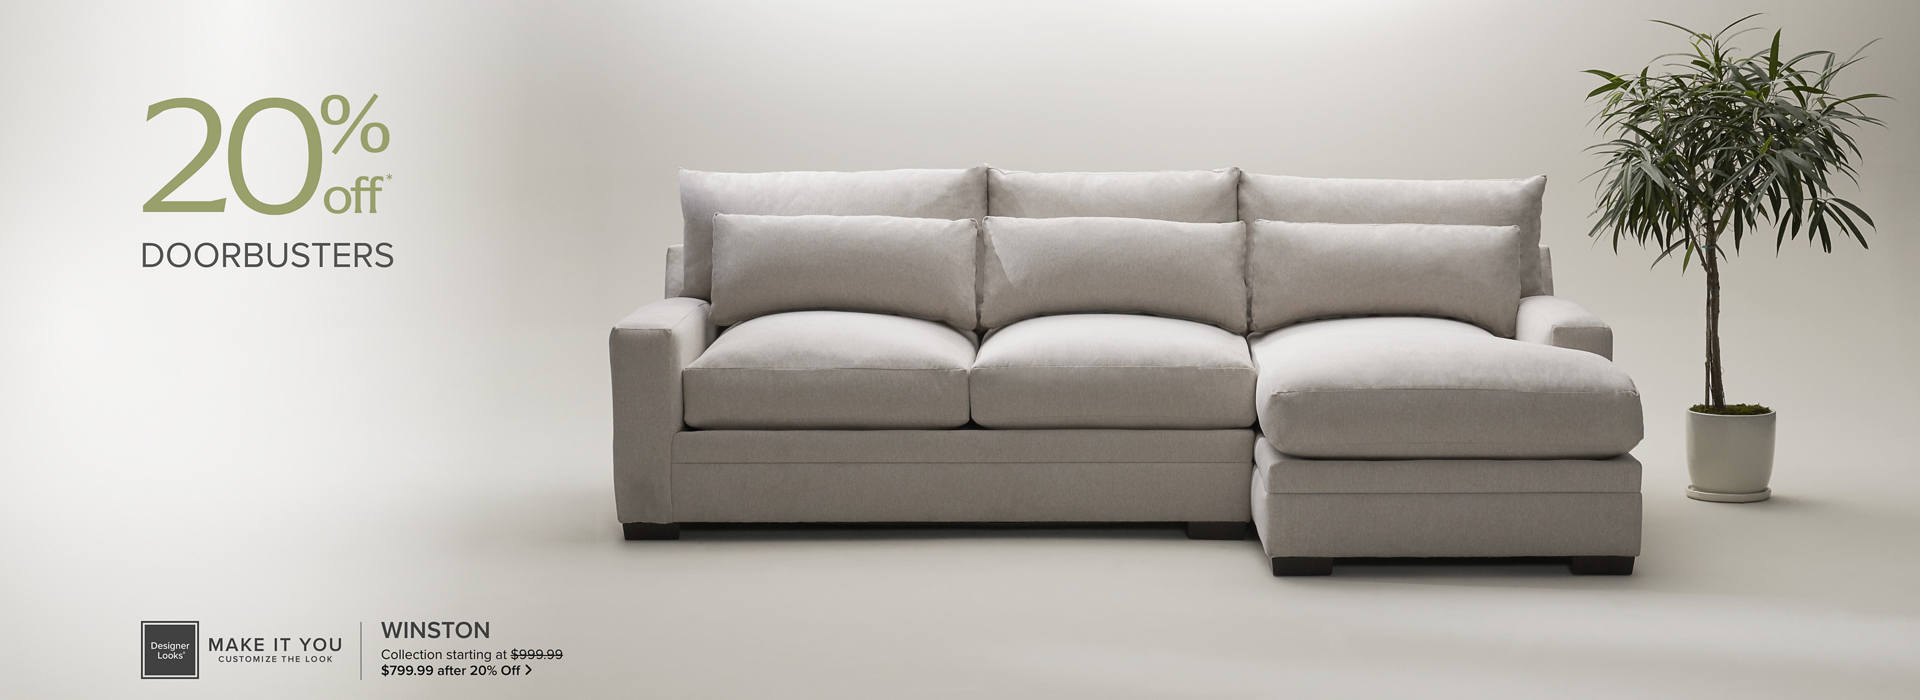 Winston 2-Piece Sectional starting at $799.99 after 20% off